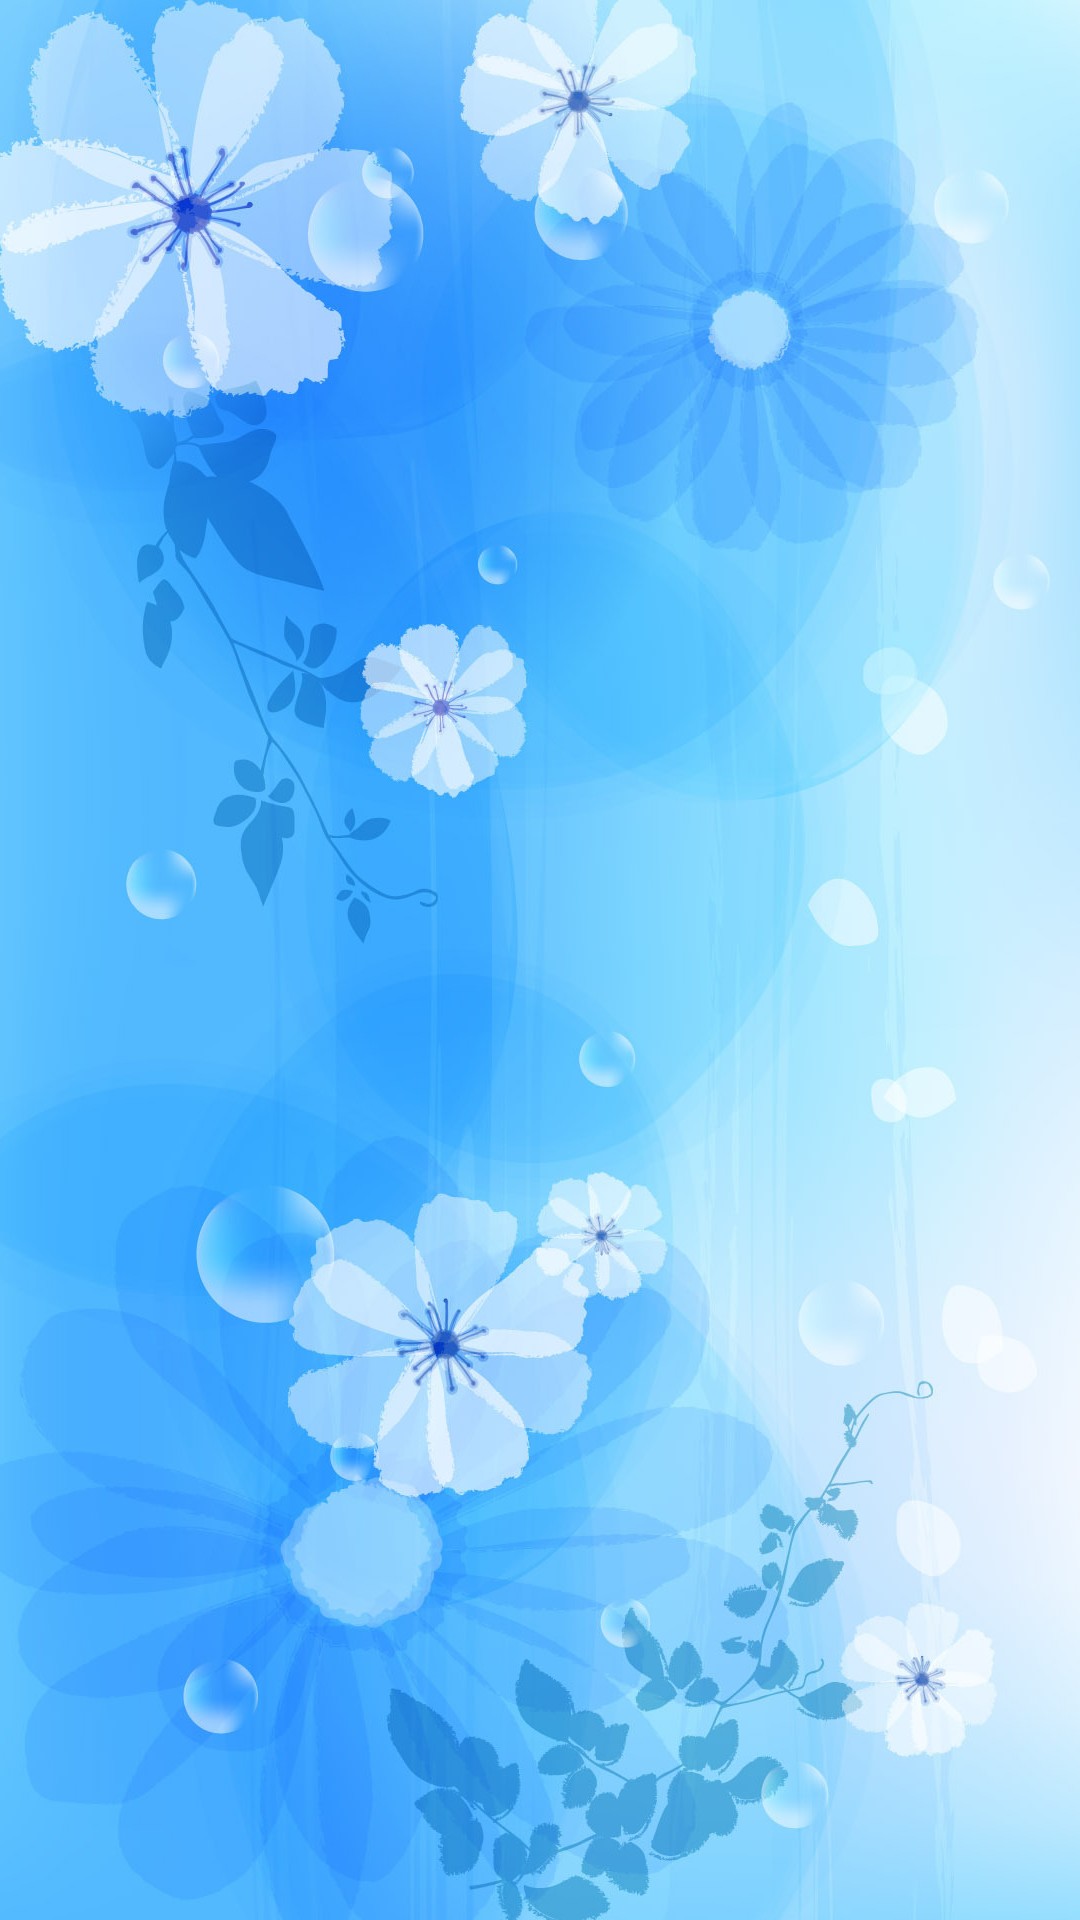 Girly Blue iPhone Wallpaper resolution 1080x1920